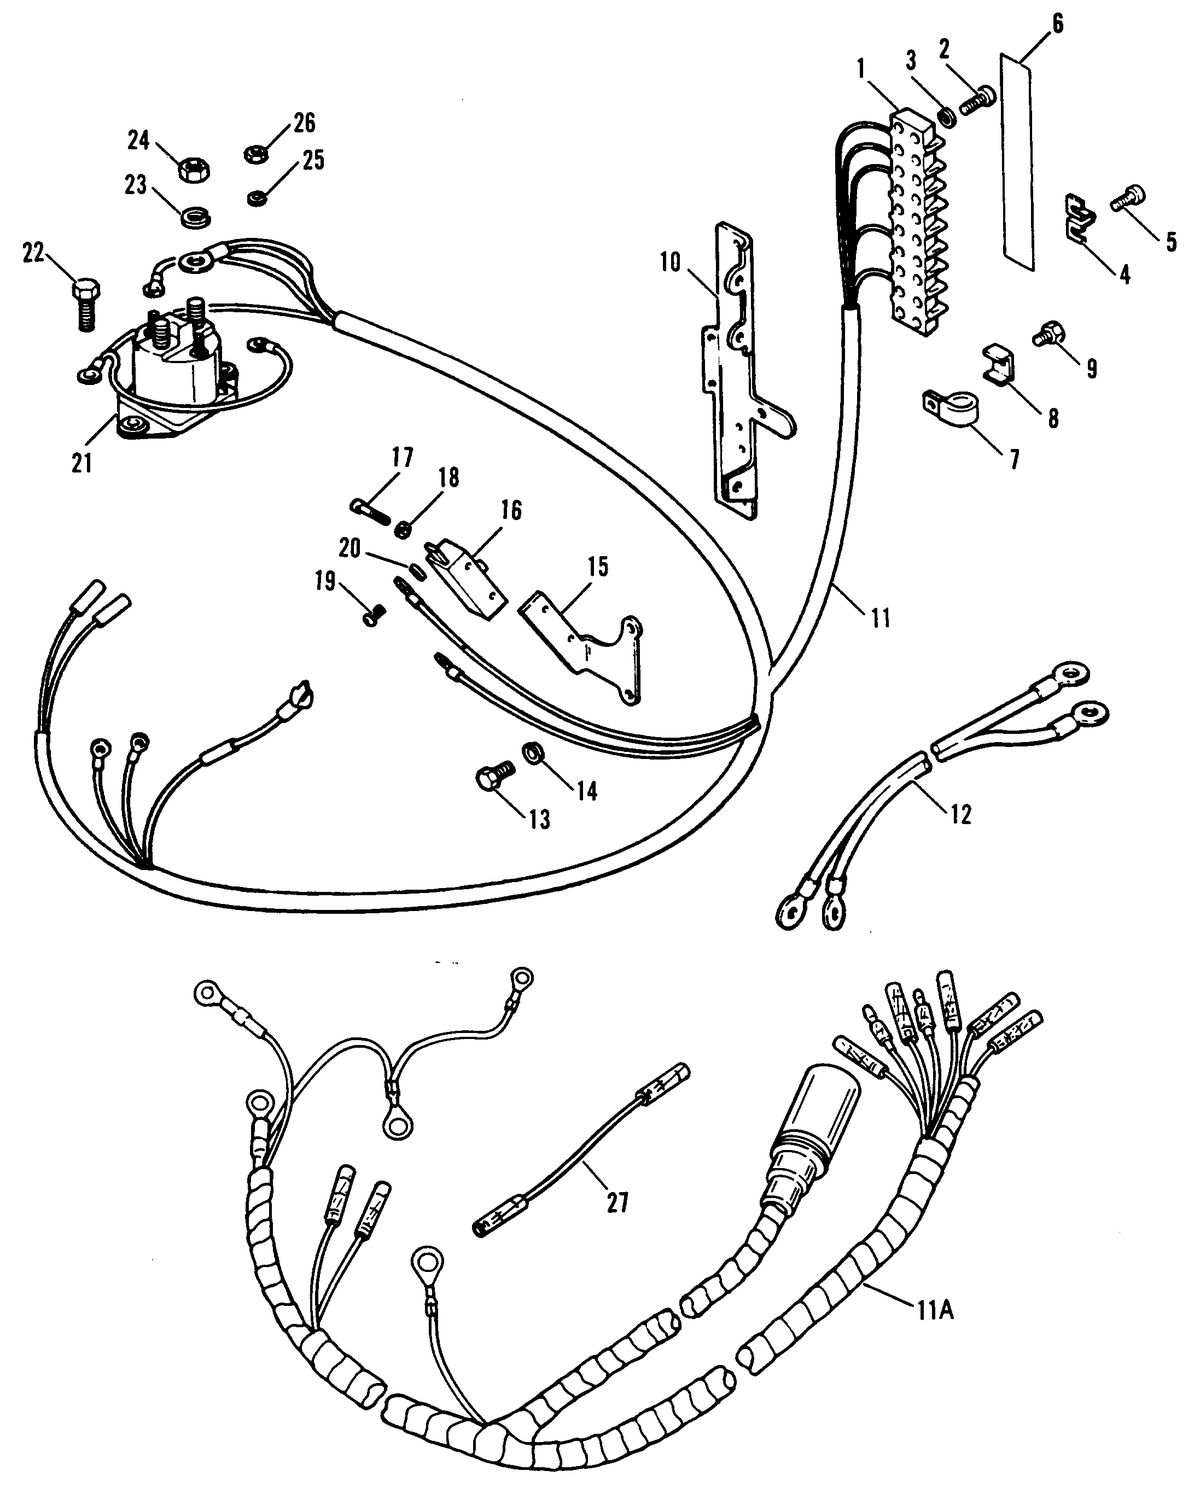 FORCE 70 H.P. ELECTRICAL COMPONENTS